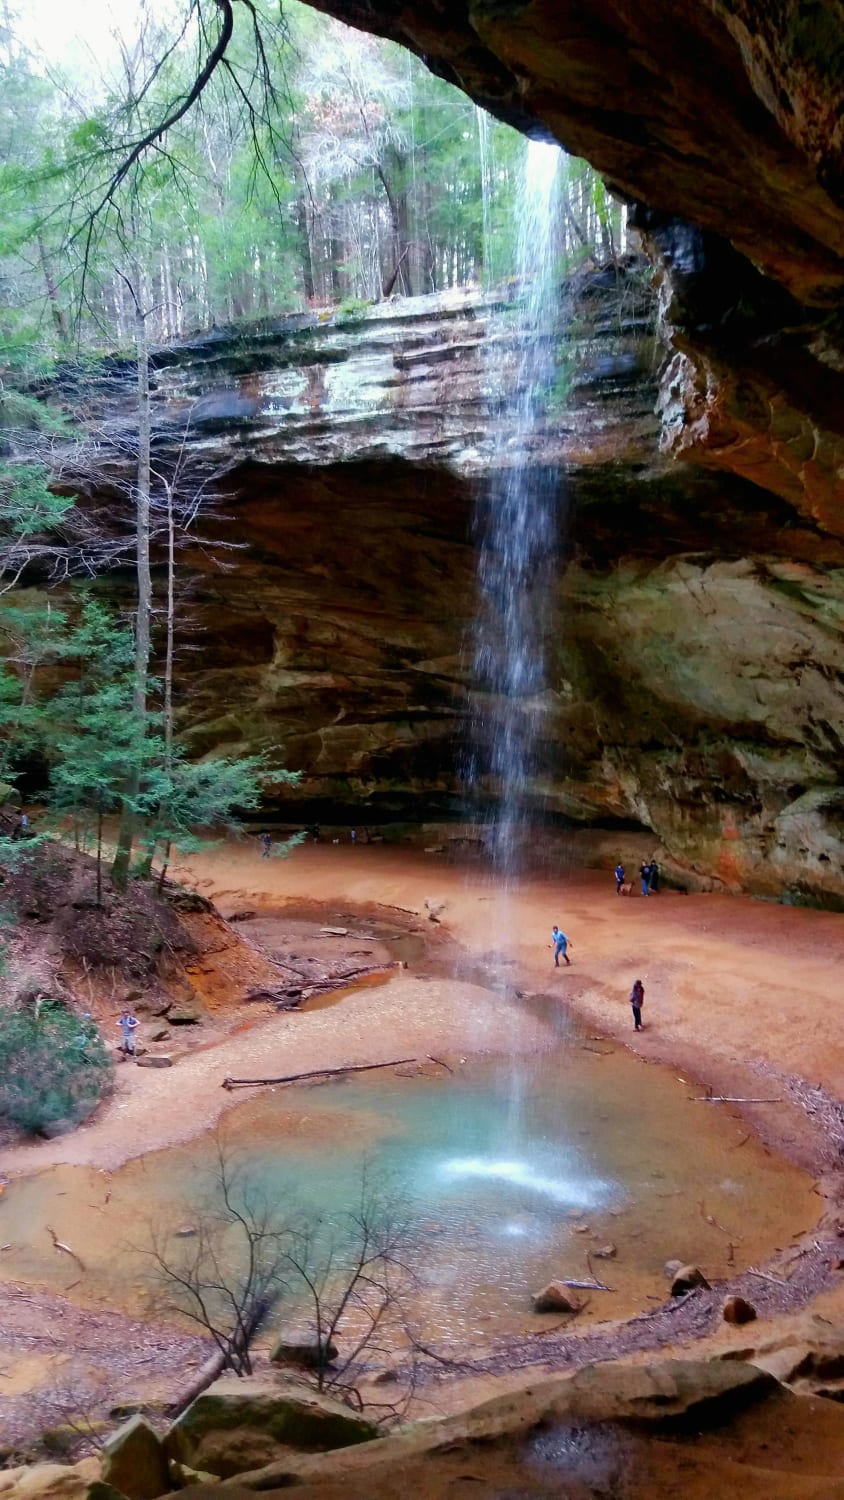 If youre in Ohio and haven't visited Hocking Hills State Park, you're missing out. (Hocking Hills, OH, USA)